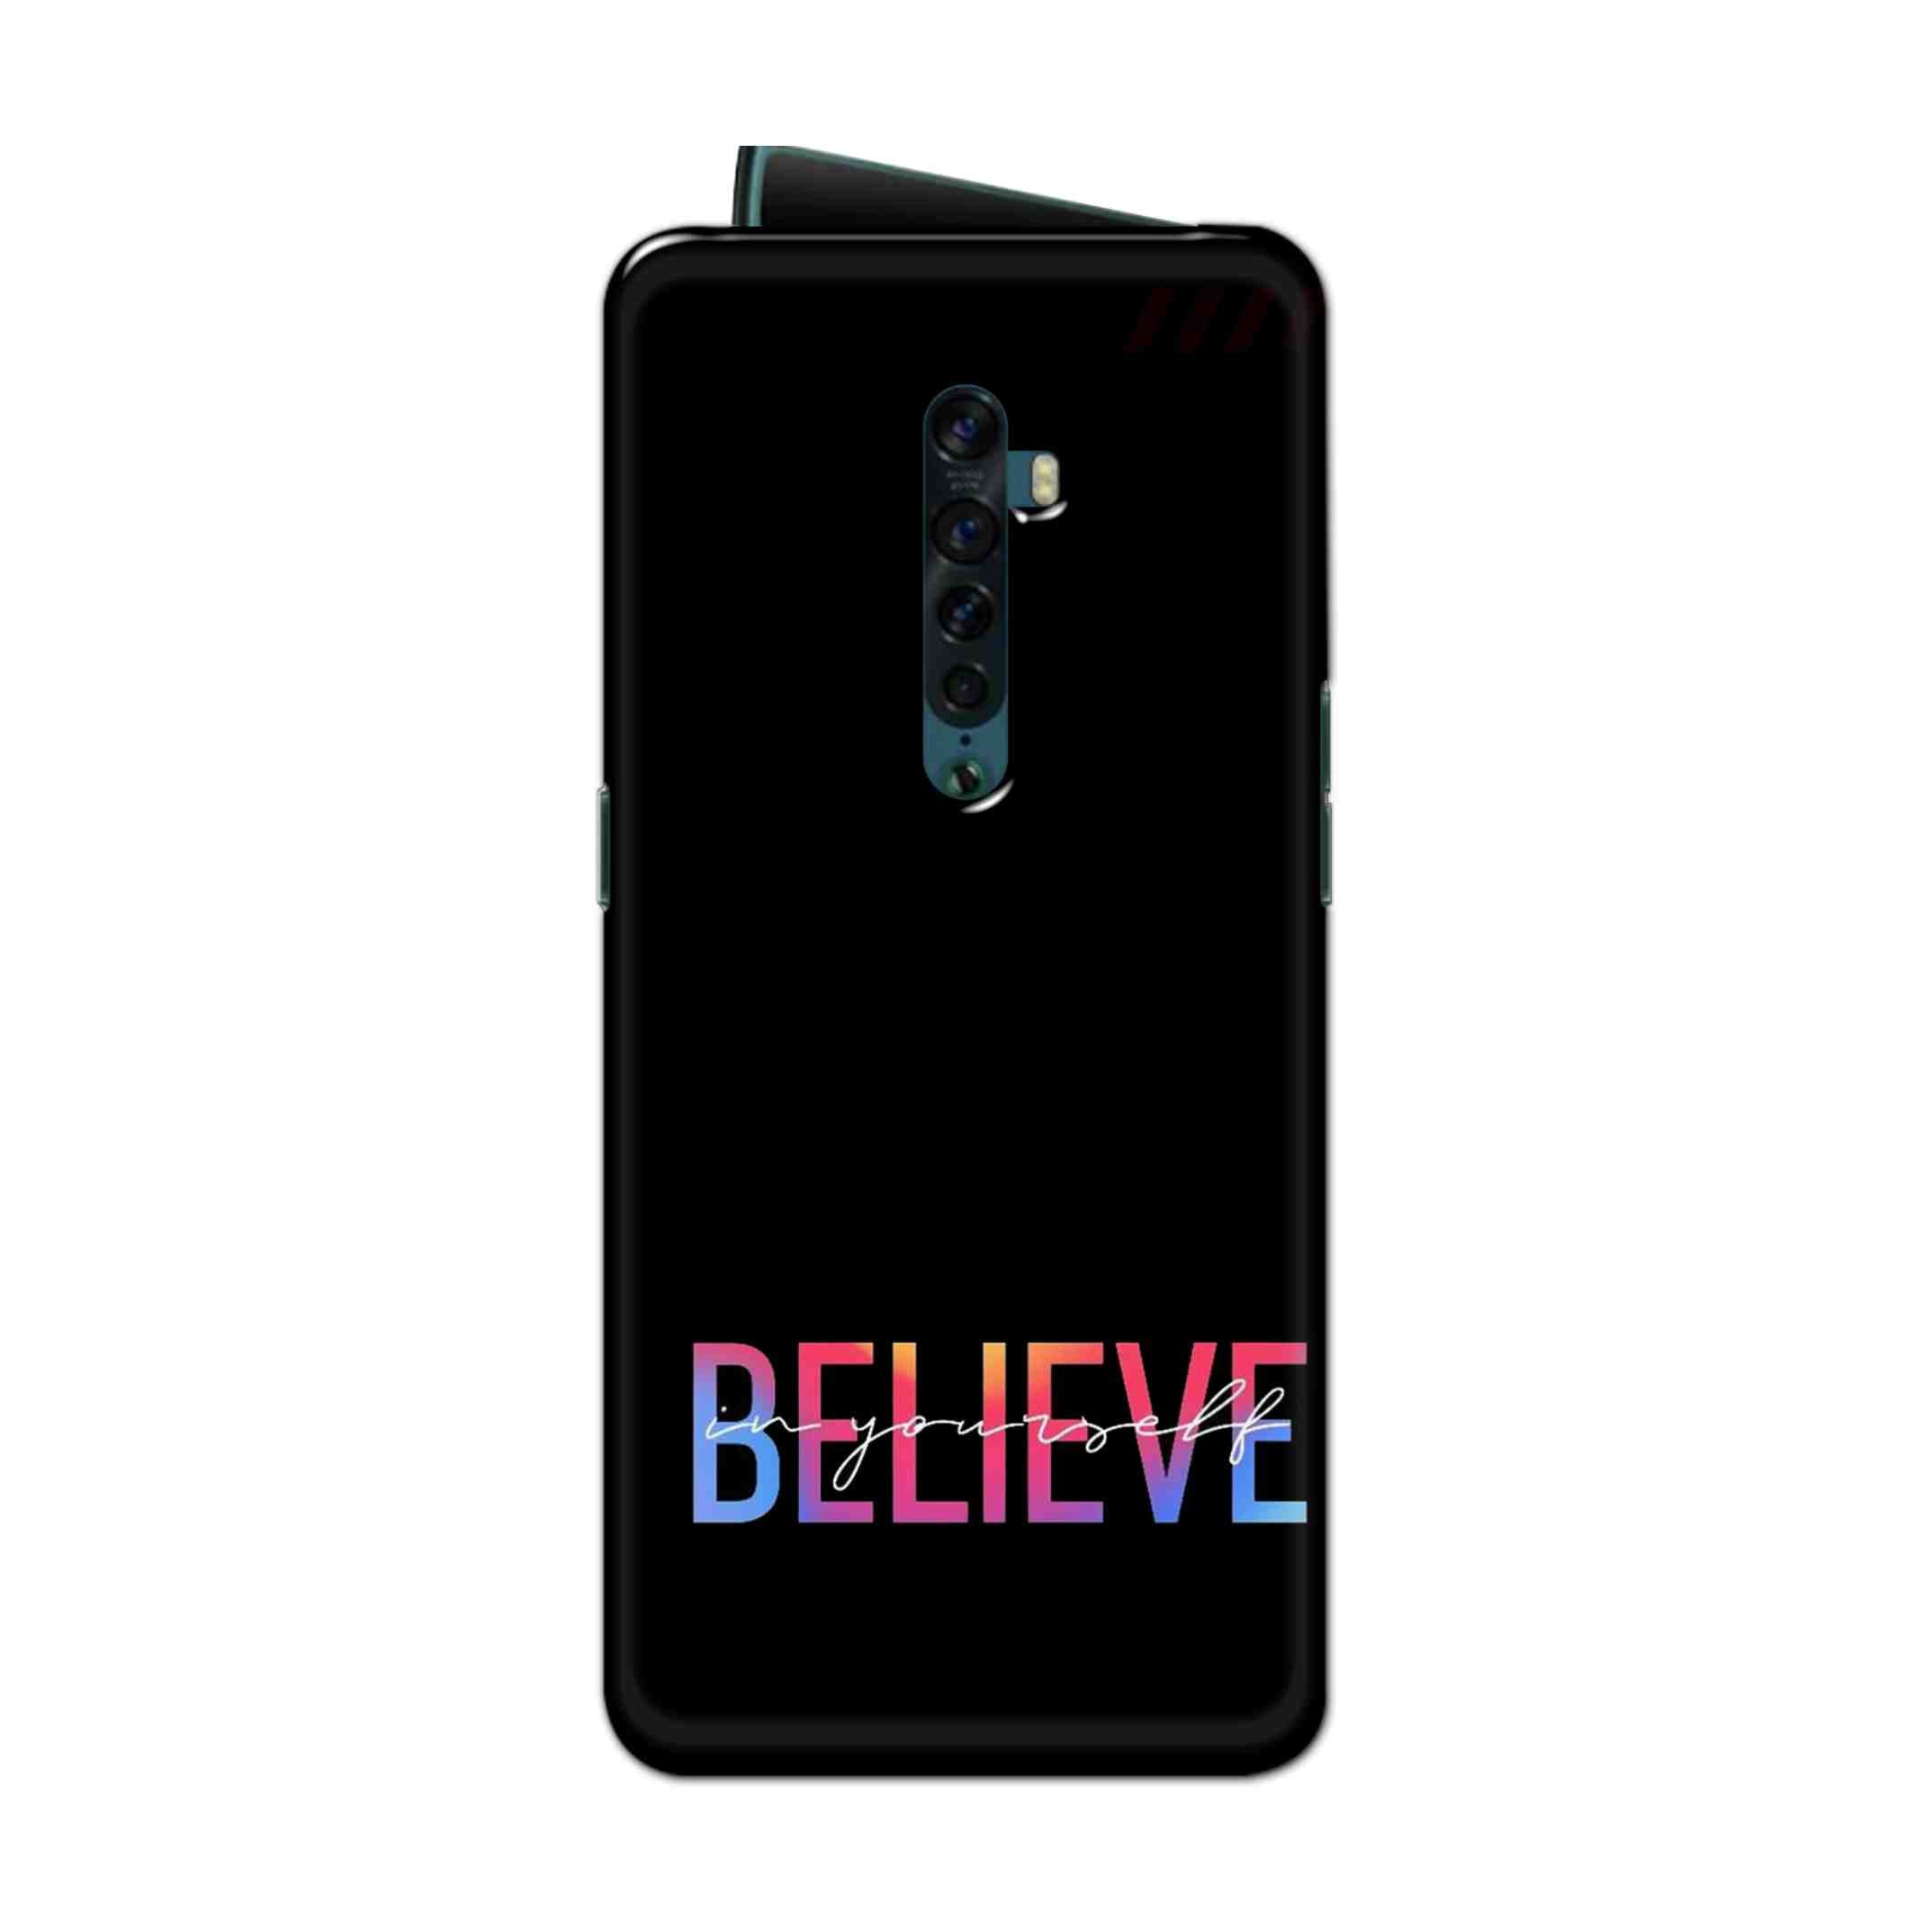 Buy Believe Hard Back Mobile Phone Case Cover For Oppo Reno 2 Online